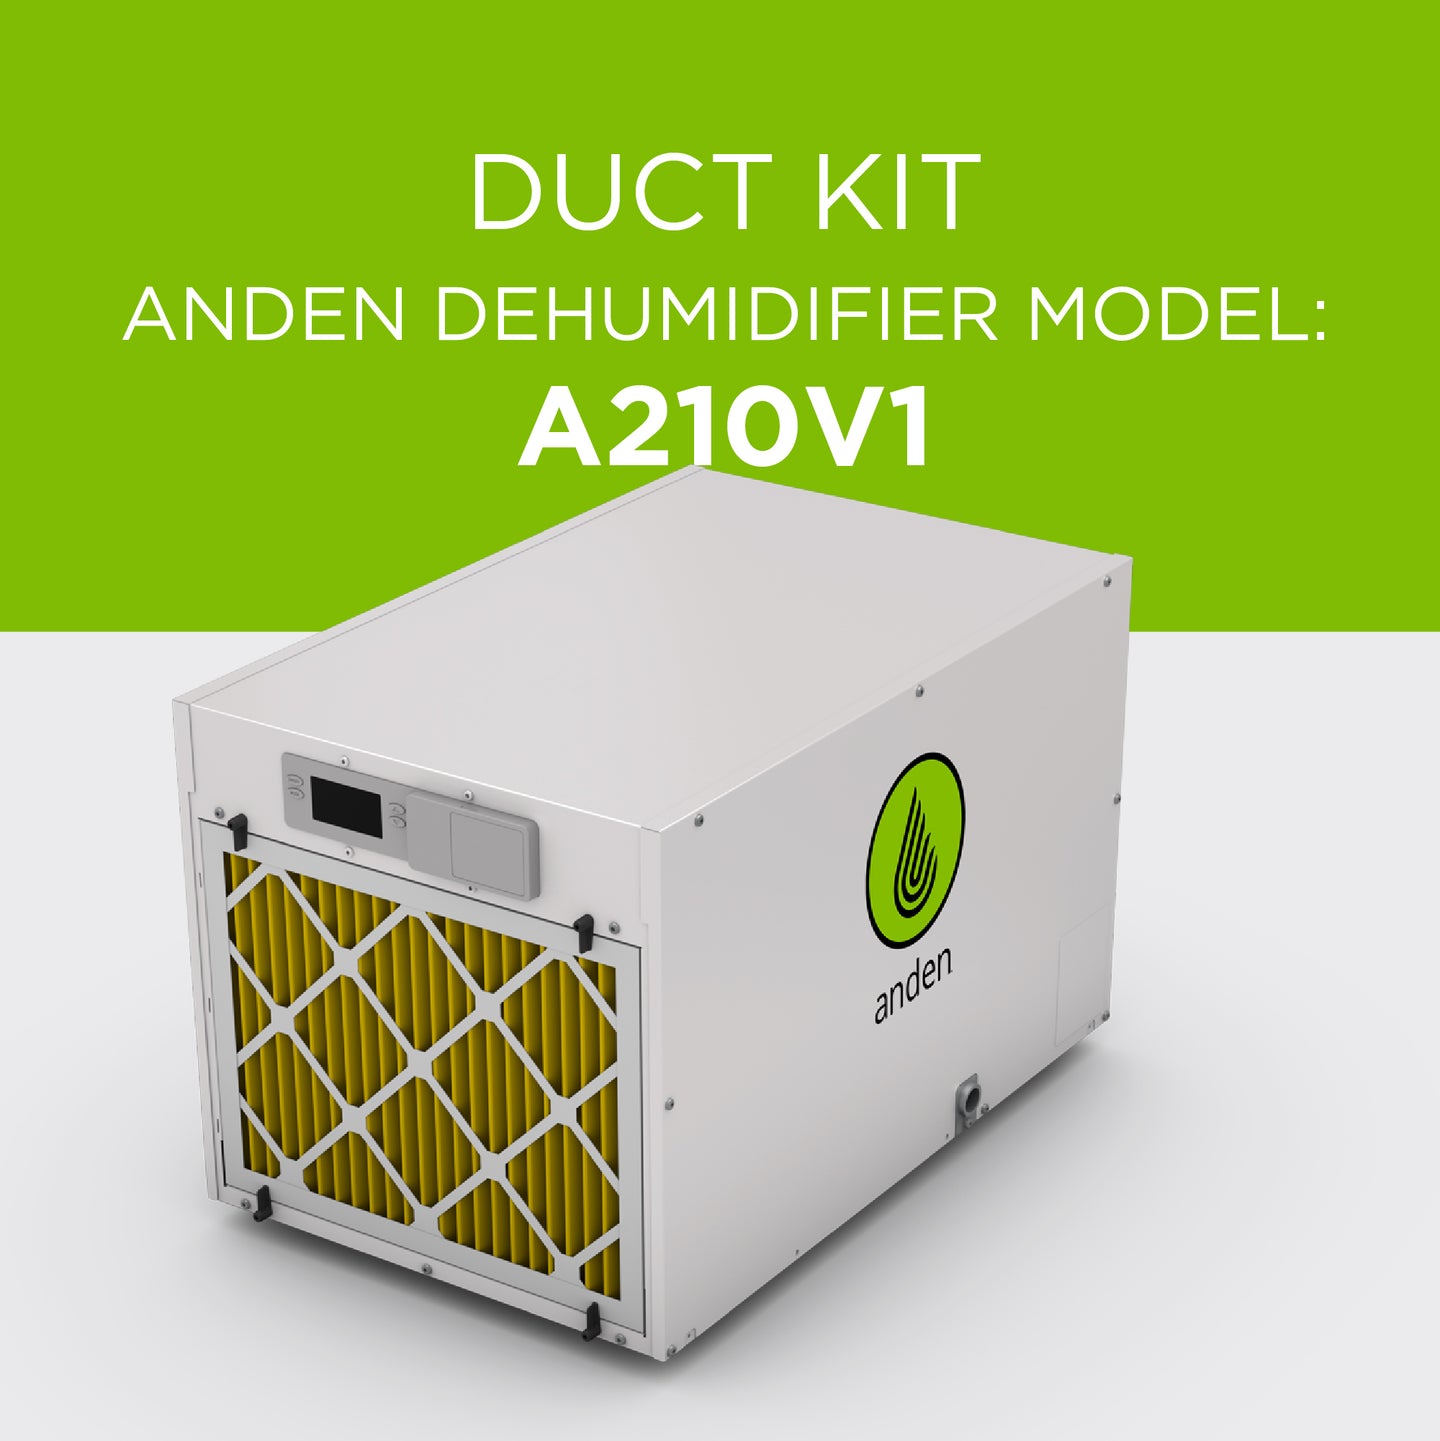 Anden 5790 Duct Kit